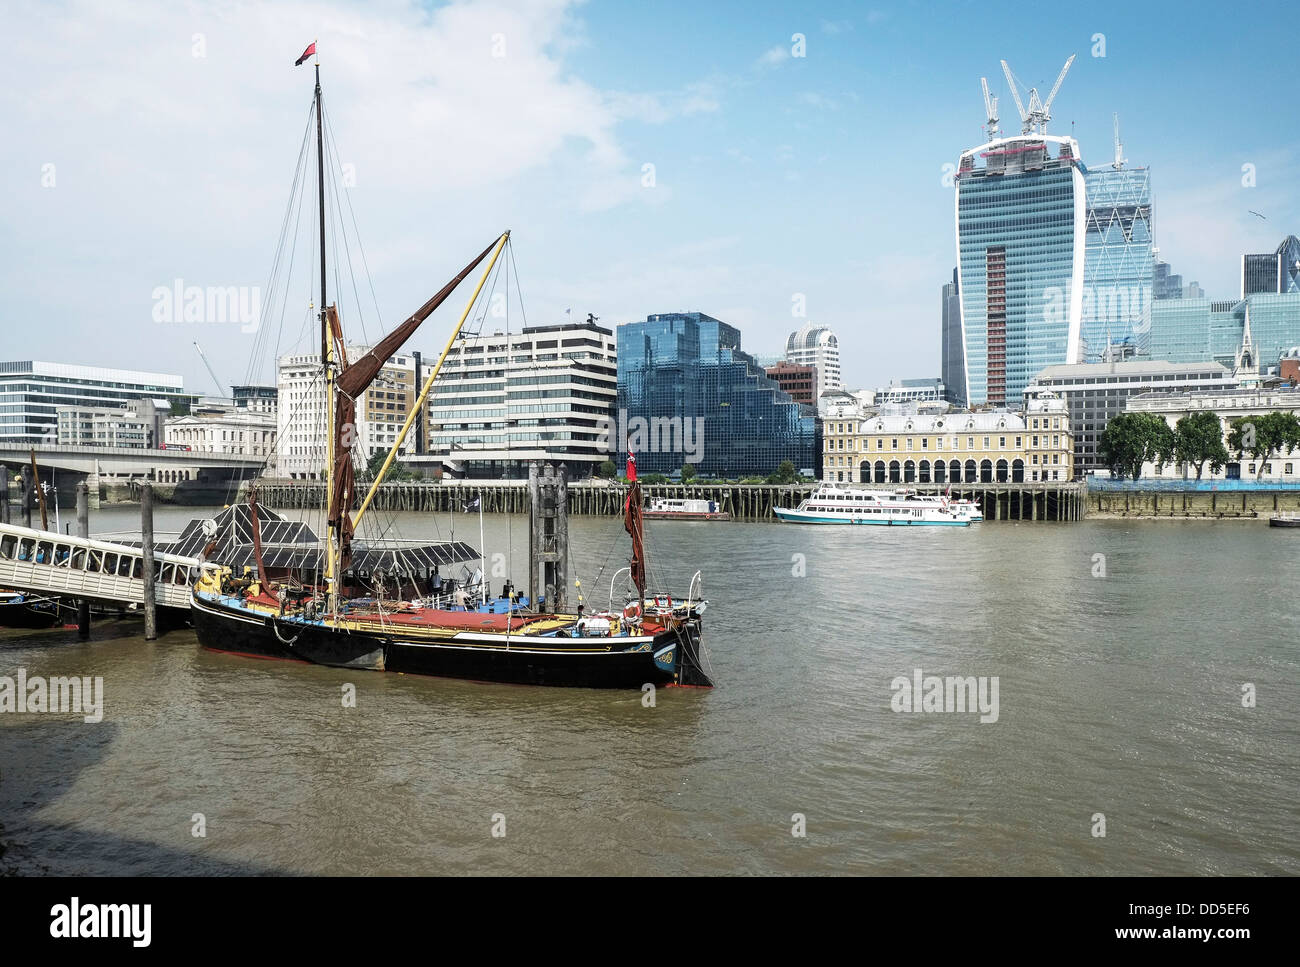 The Lady Daphne moored in the Thames. Stock Photo